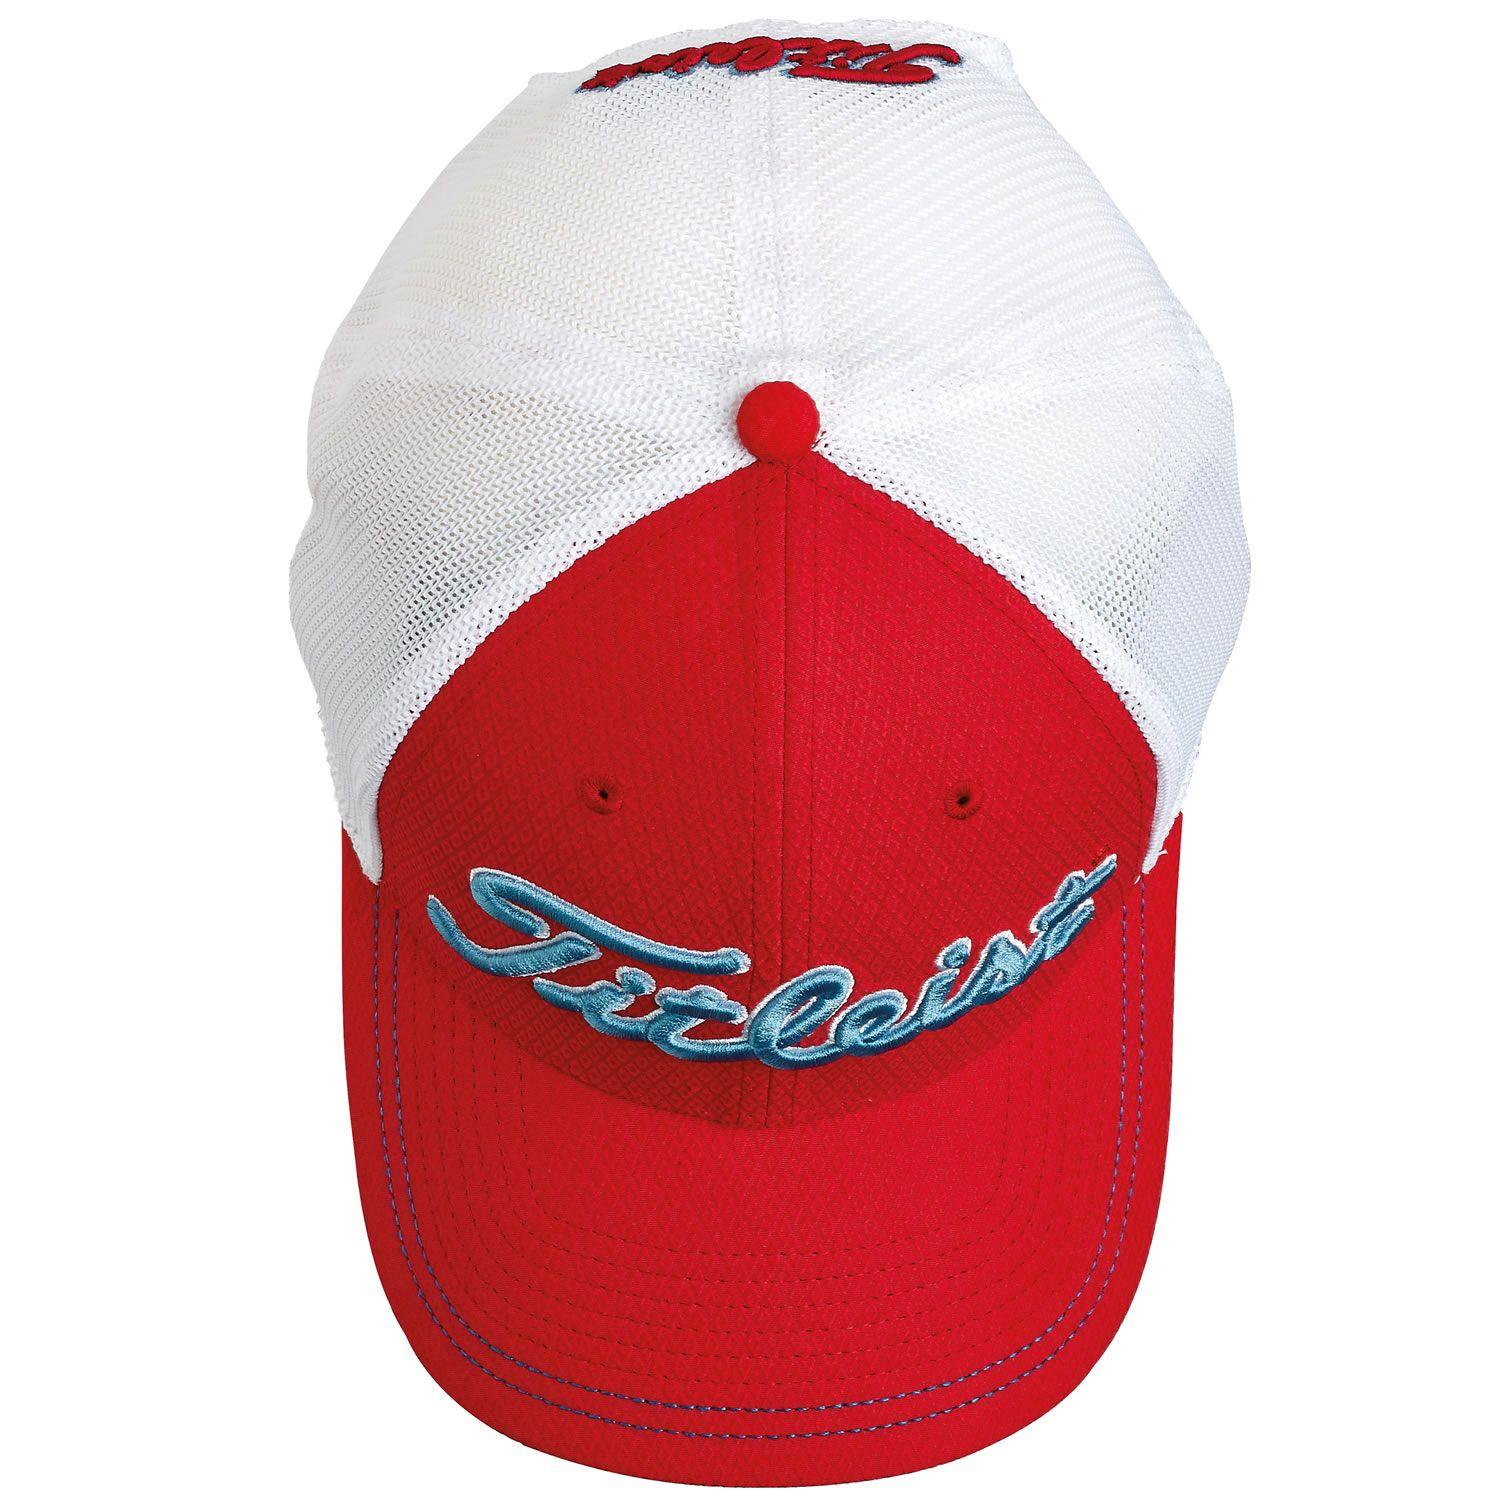 Red White and Tech Logo - Titleist Stretch Tech Mesh Adjustable Baseball Cap Red/White ...